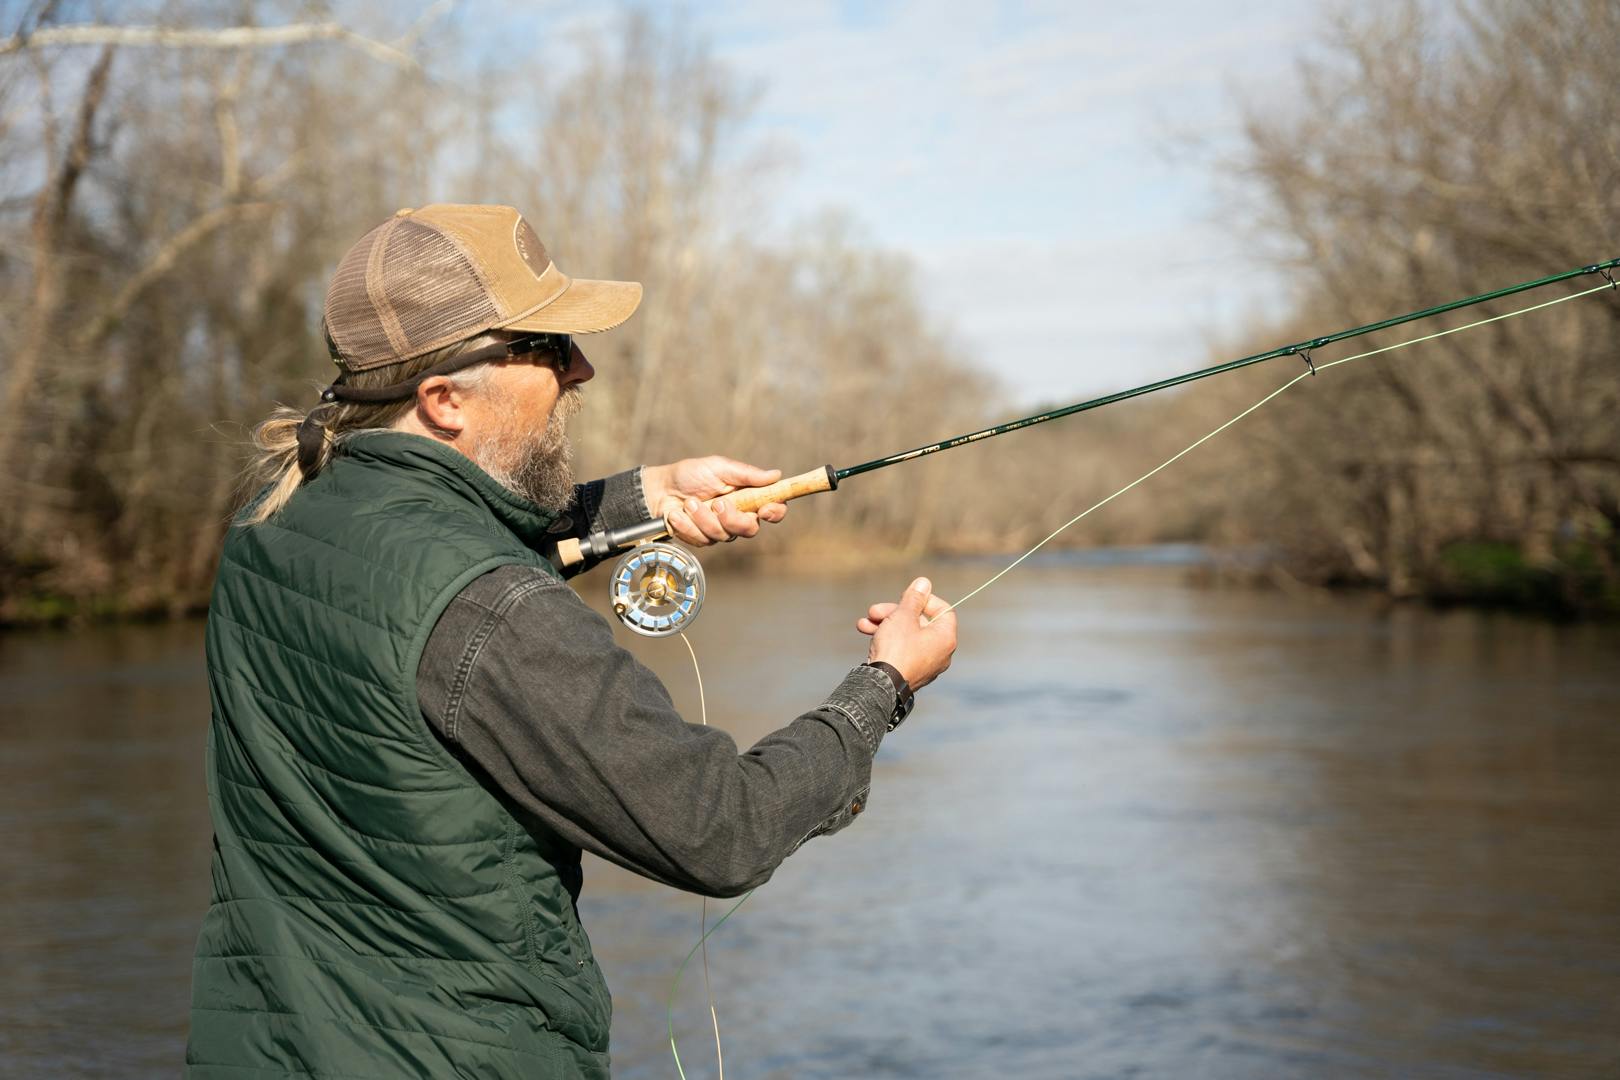 Temple Fork Outfitters Signature 2 Fly Rod · 9' · 5 wt